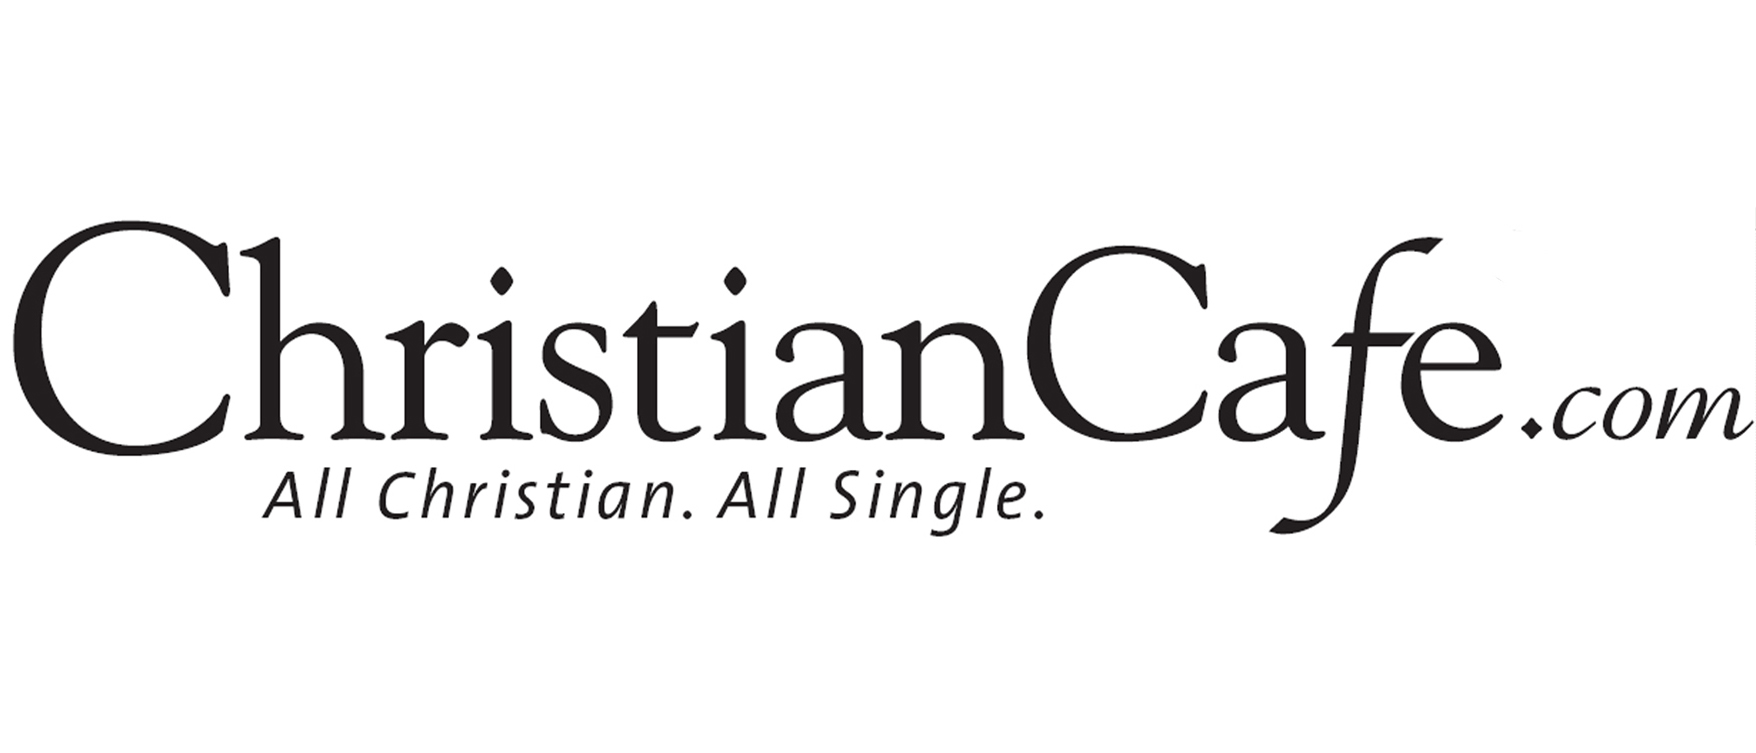 best christian dating site in europe